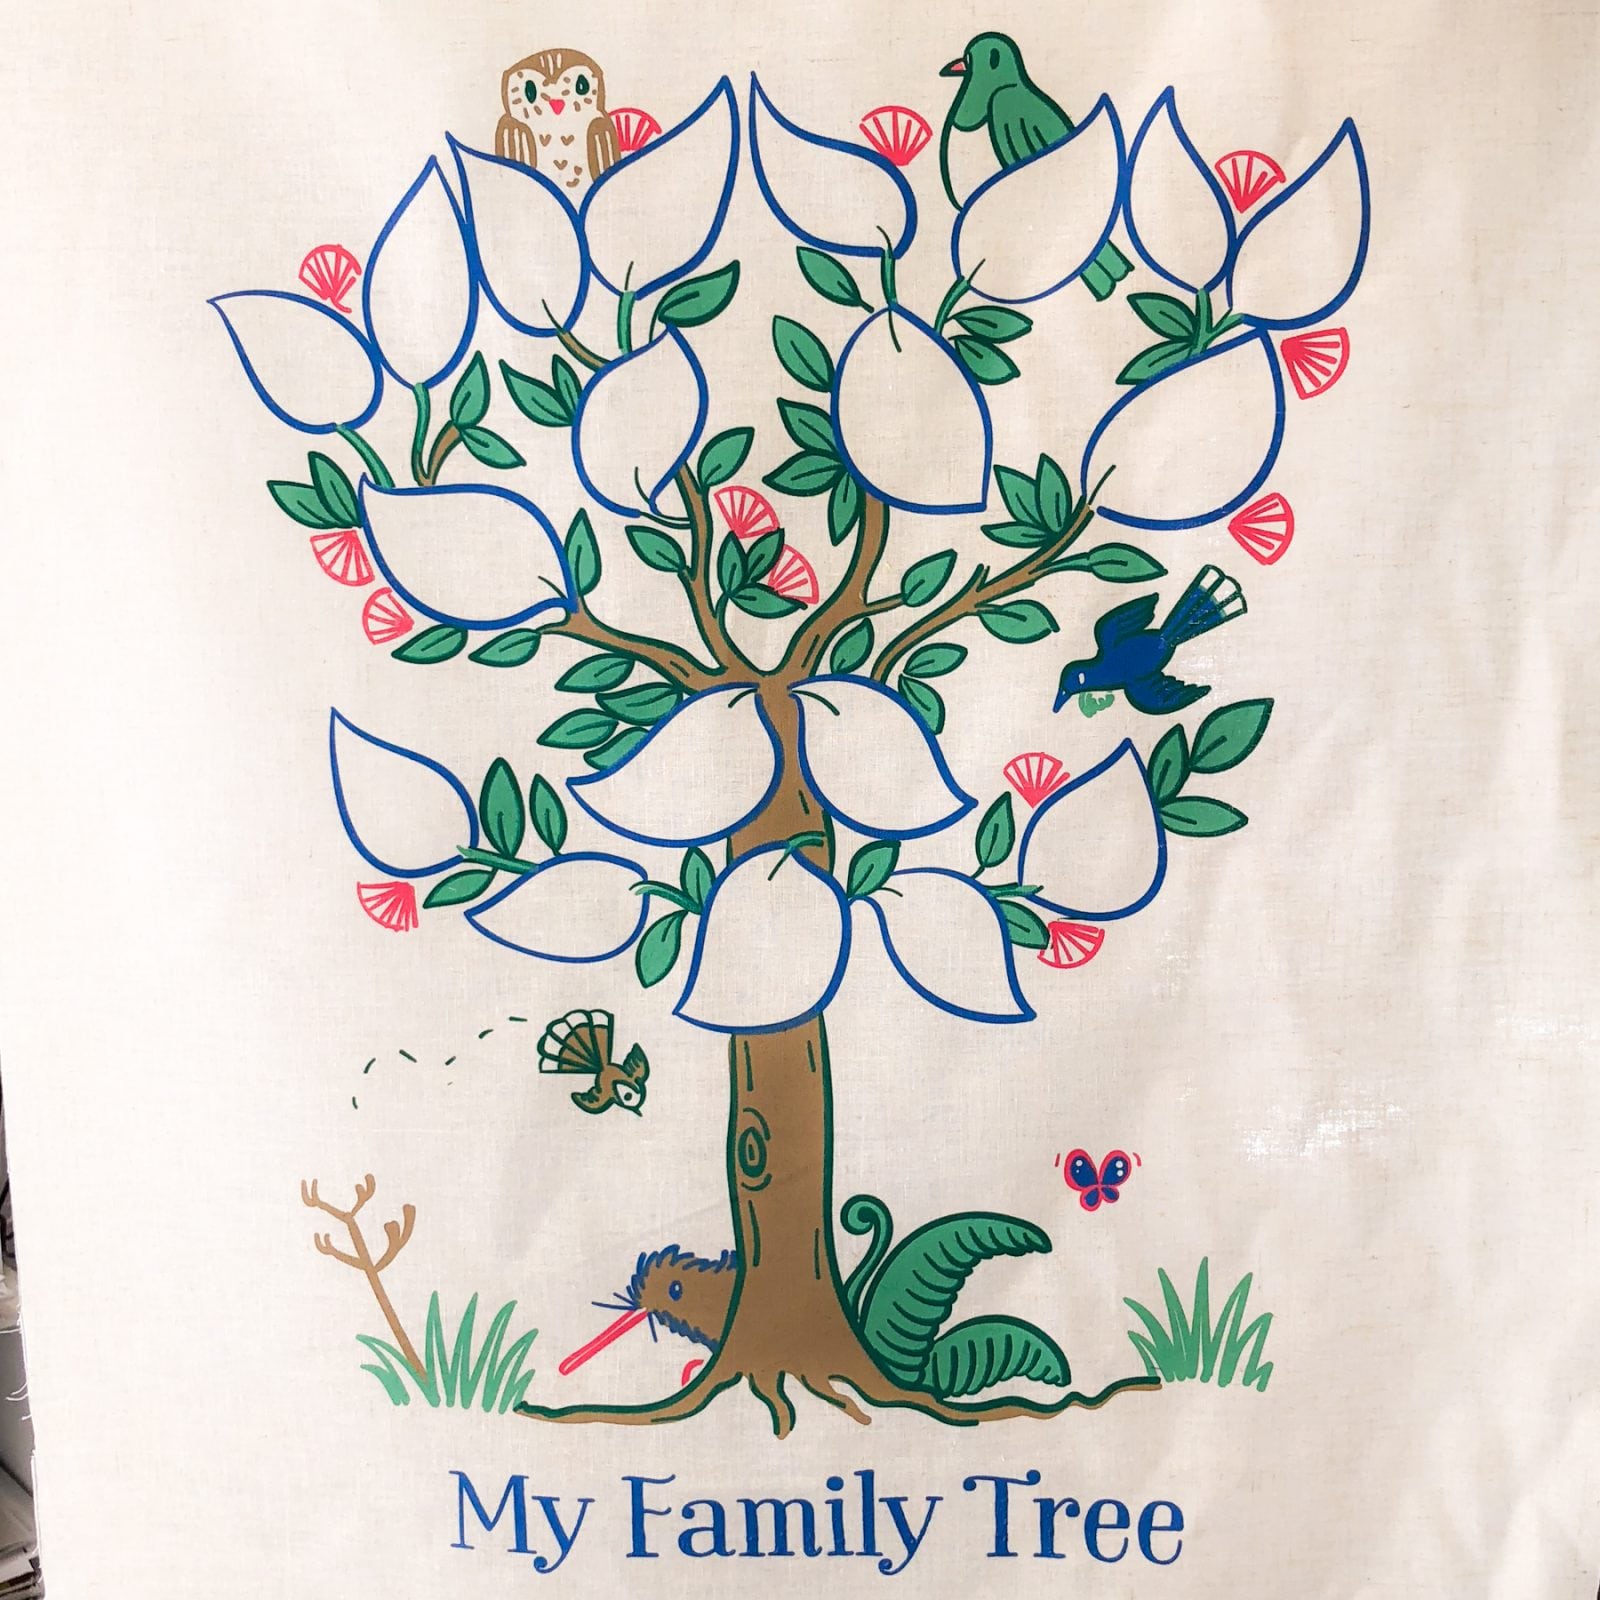 Family Tree embroidery Project (1 of 4) cover photo